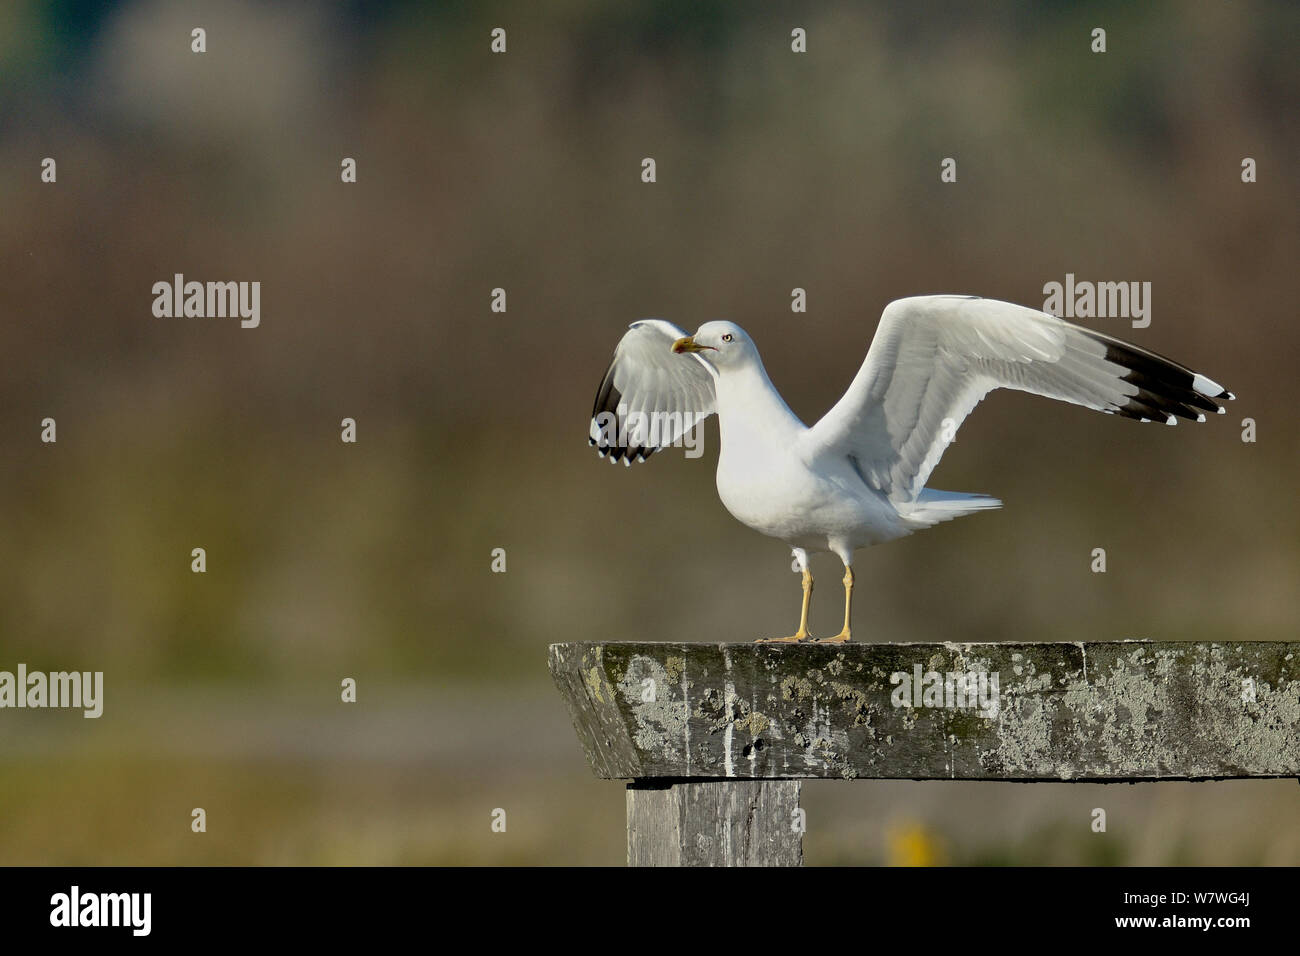 Yellow legged gull (Larus michahellis) with stretched wings on piece of wood, Breton Marsh, France, December. Stock Photo